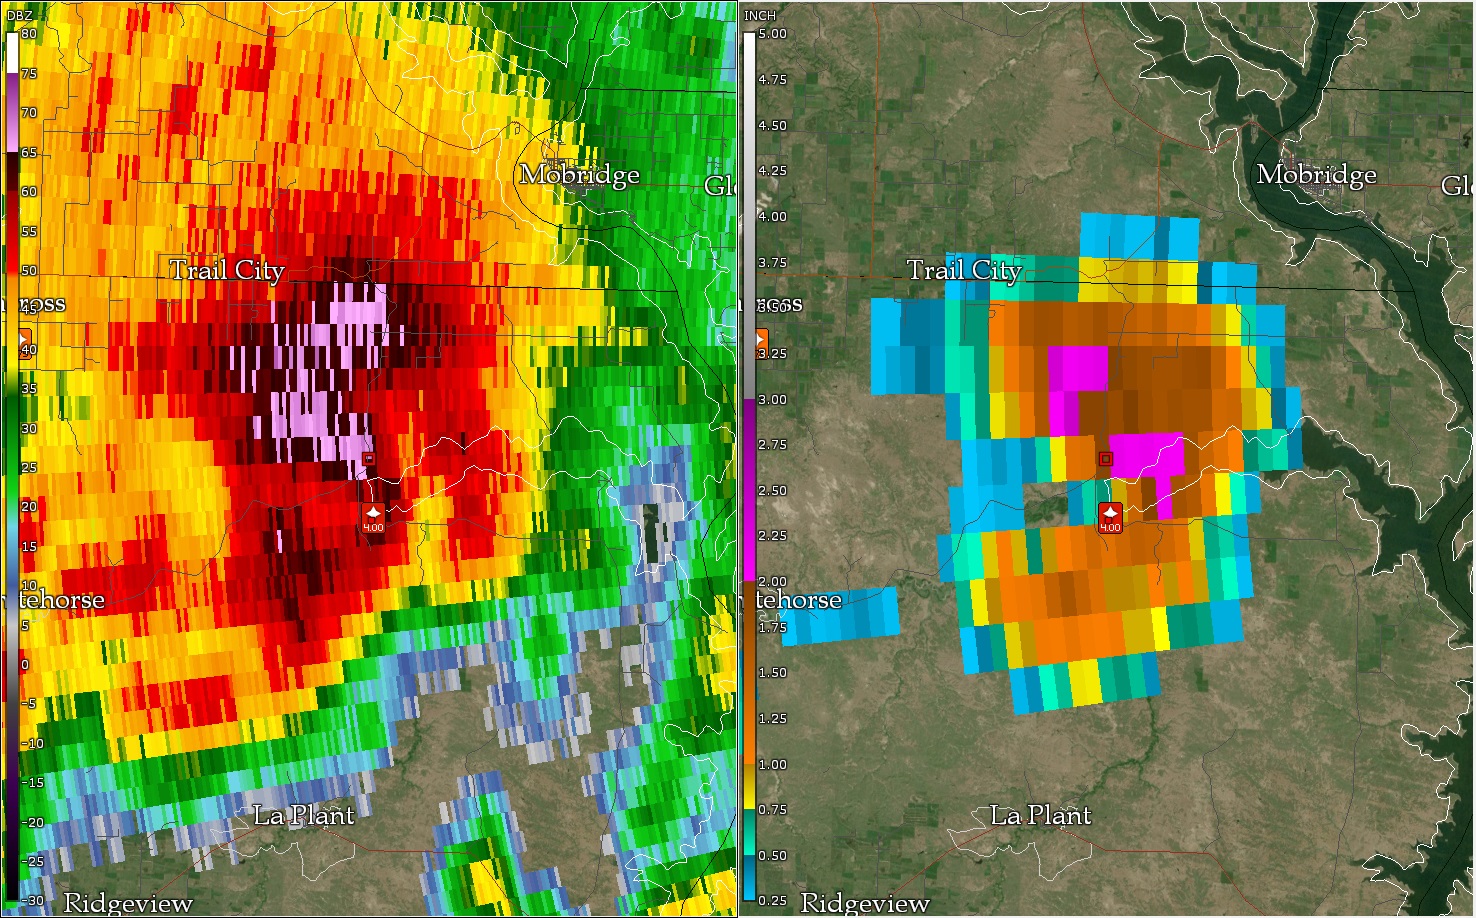 Radar Image of the storm as it was producing 4" hail in Promise, SD. 